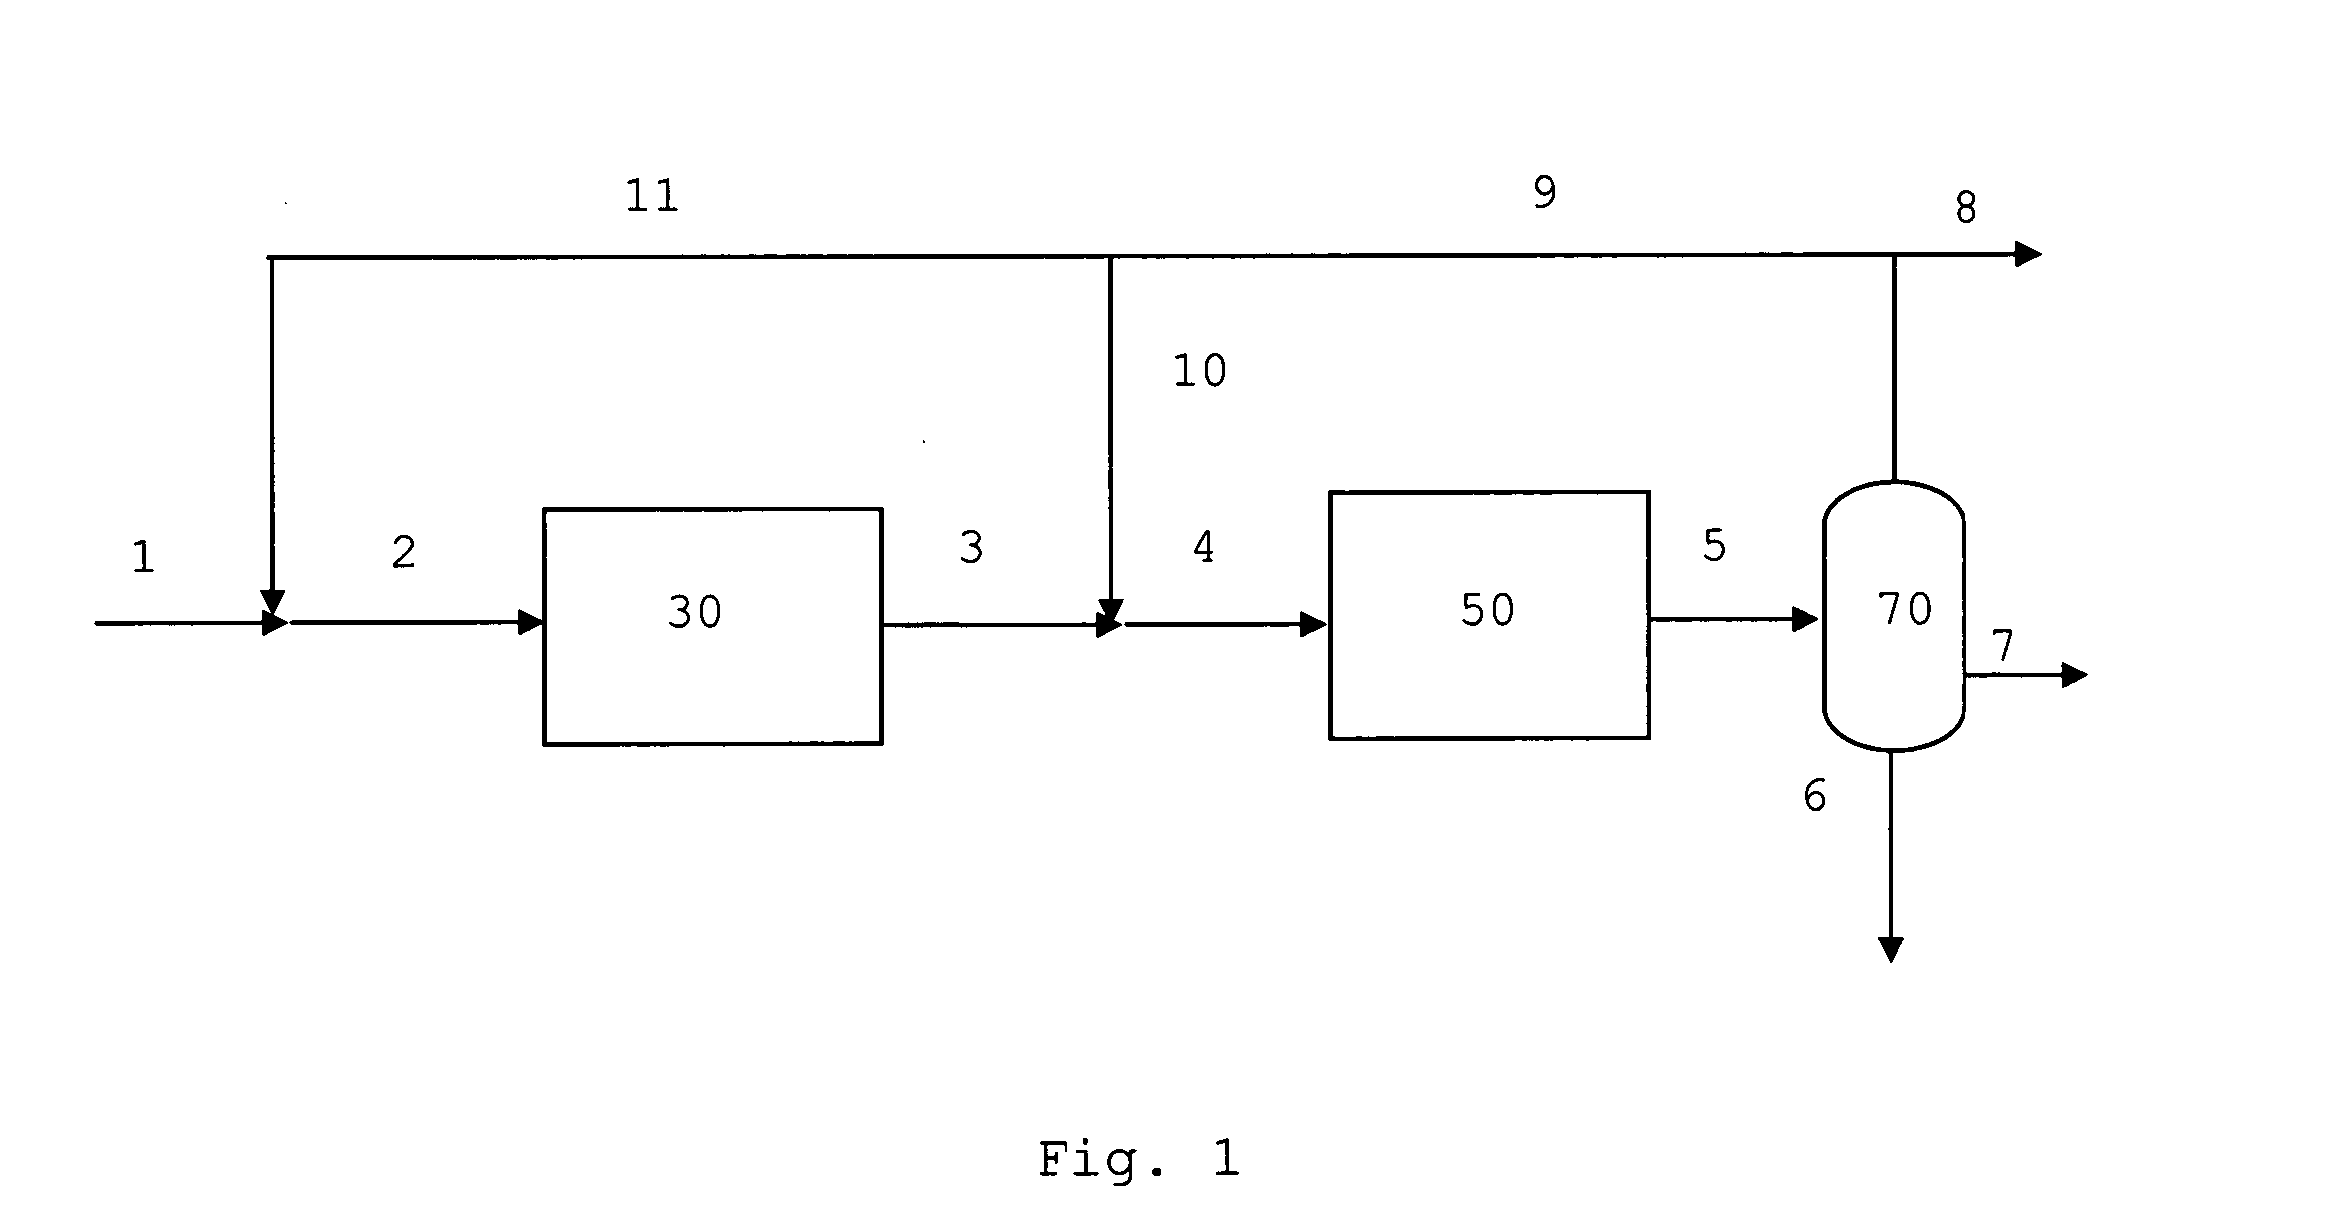 Process For Converting Difficultly Convertible Oxygenates to Gasoline